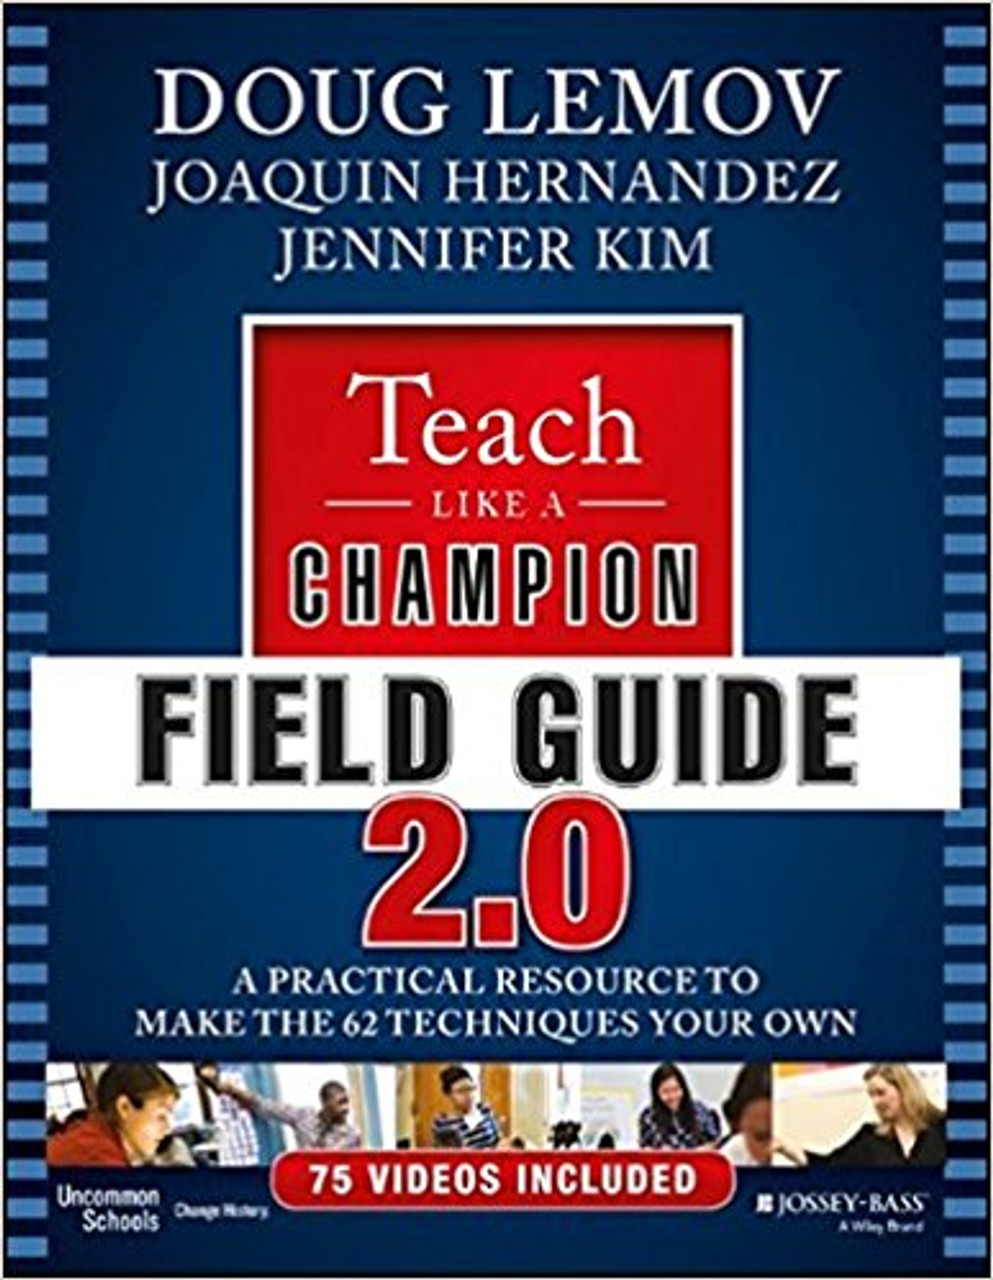 Teach Like a Champion Field Guide 2.0: A Practical Resource to Make the 62 Techniques Your Own by Doug Lomov